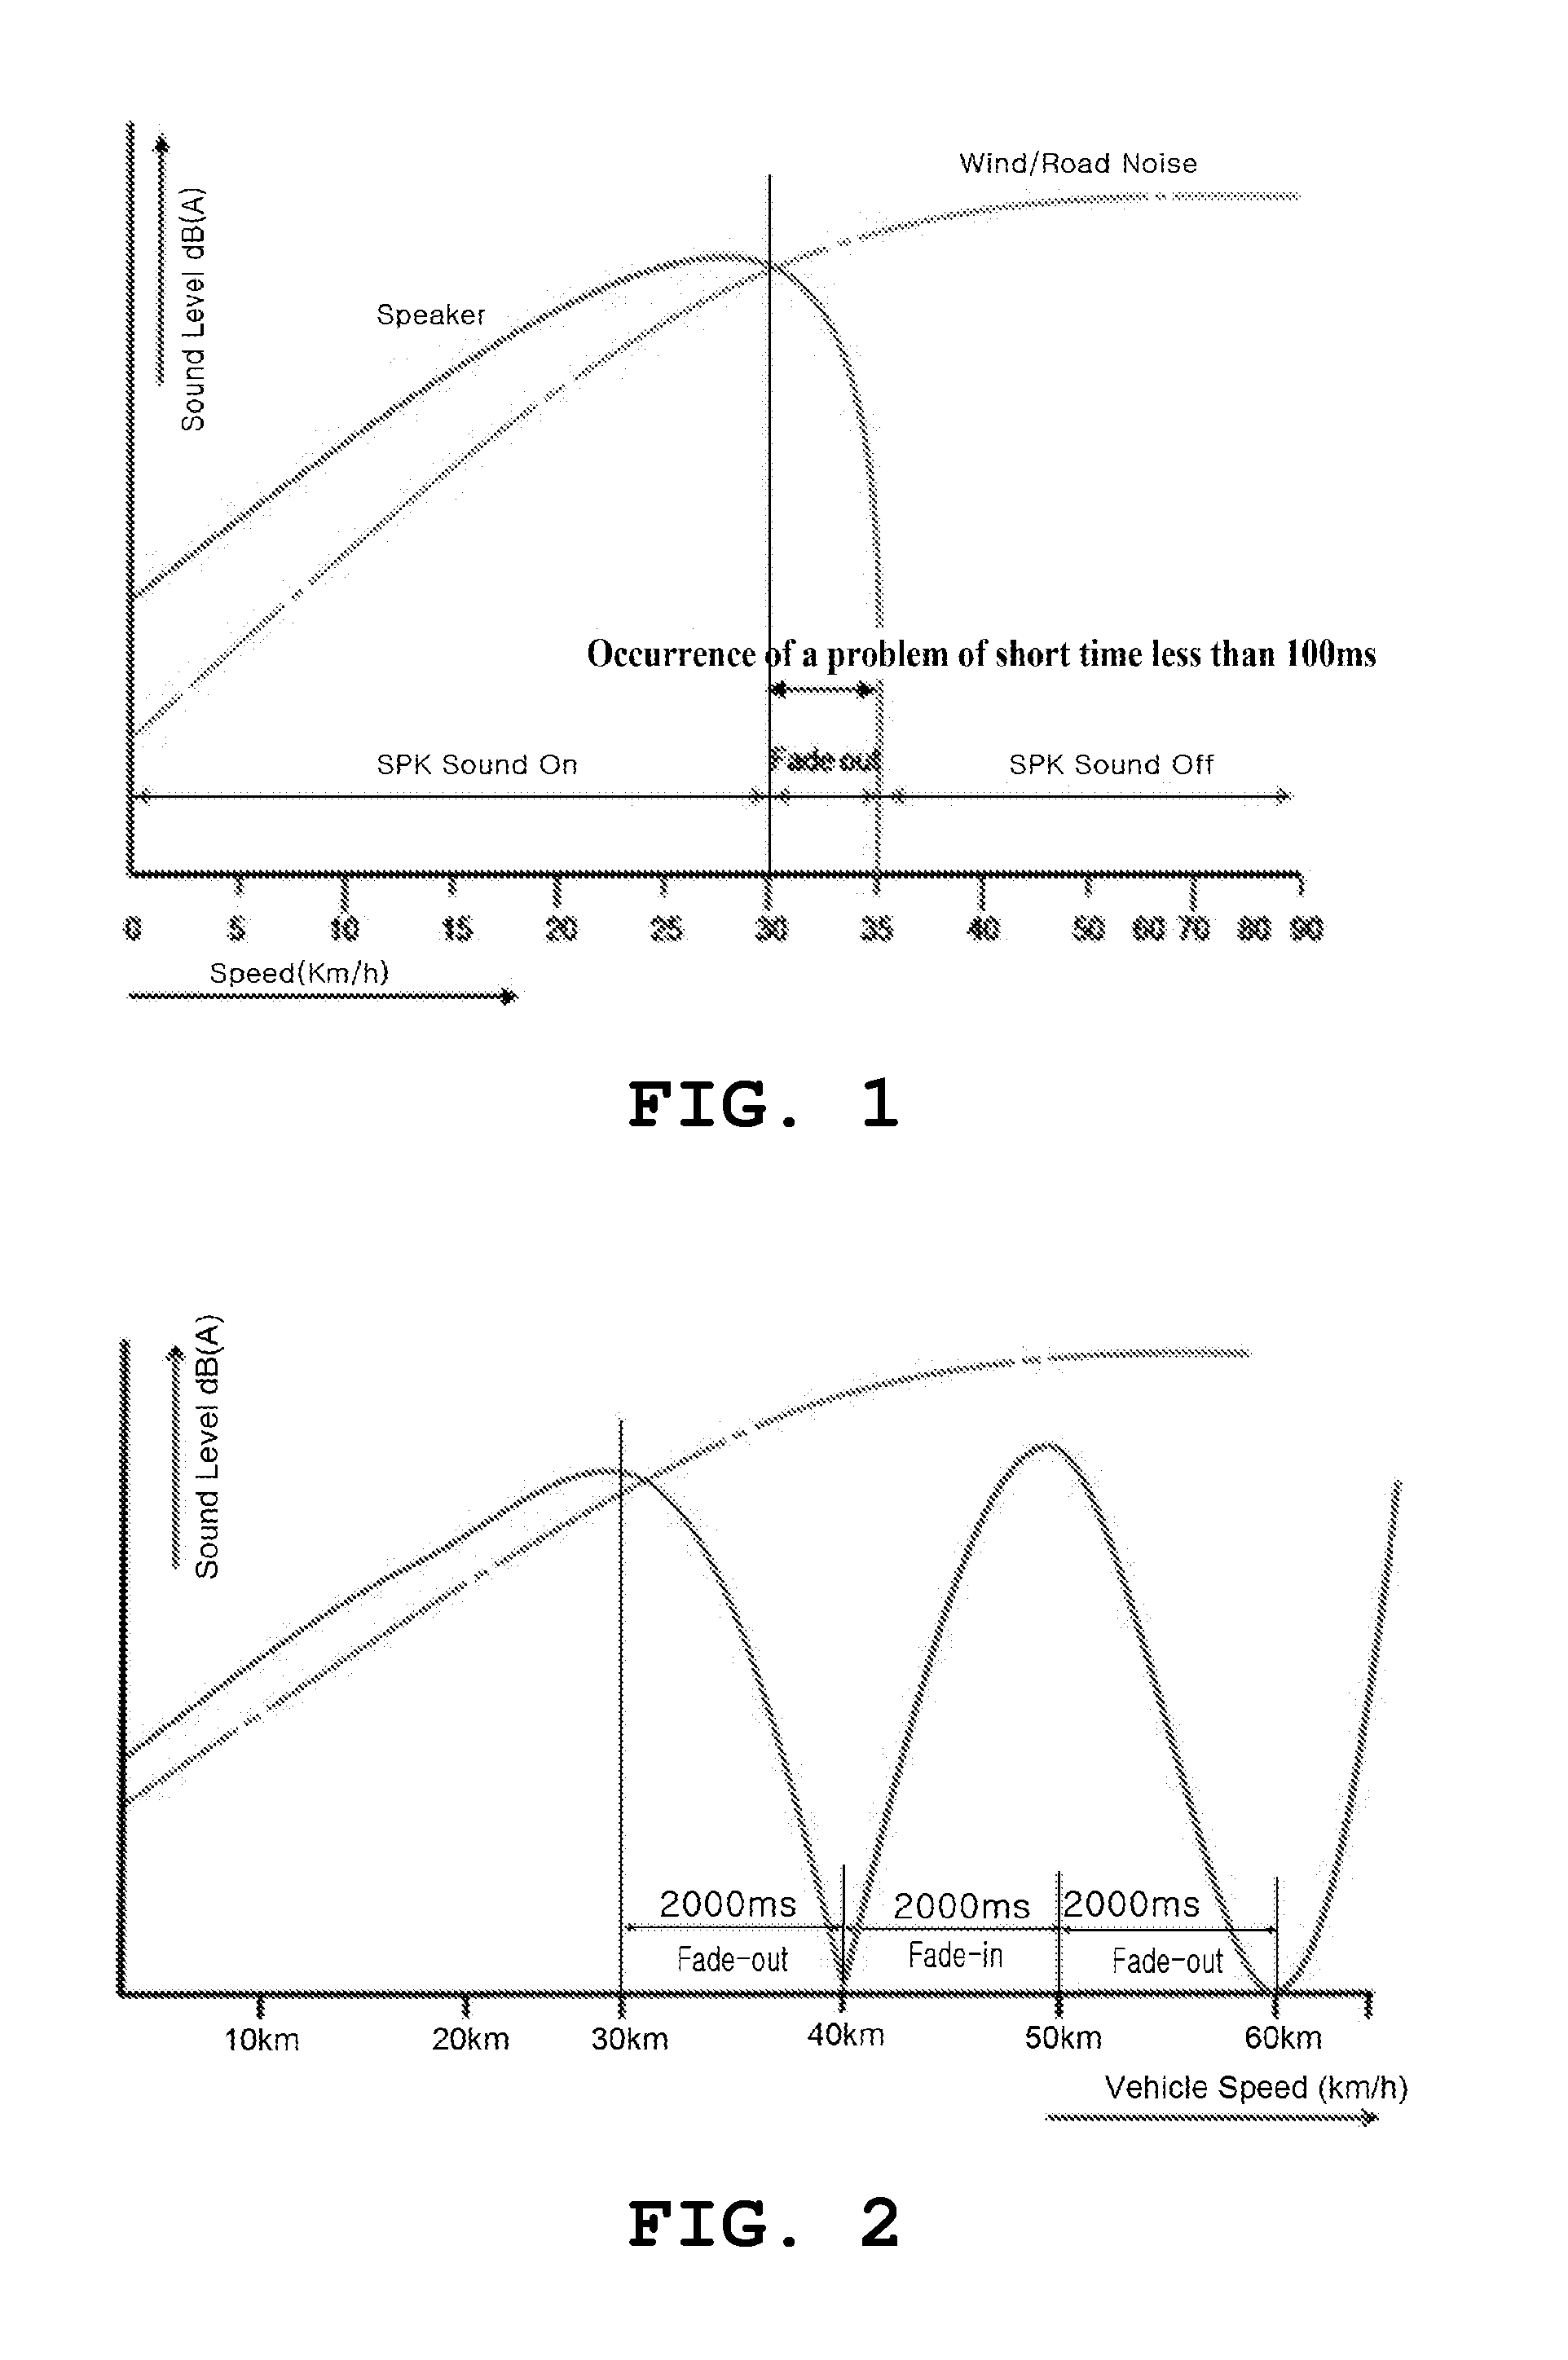 Sound generating system for environment friendly vehicle and a method for controlling the system